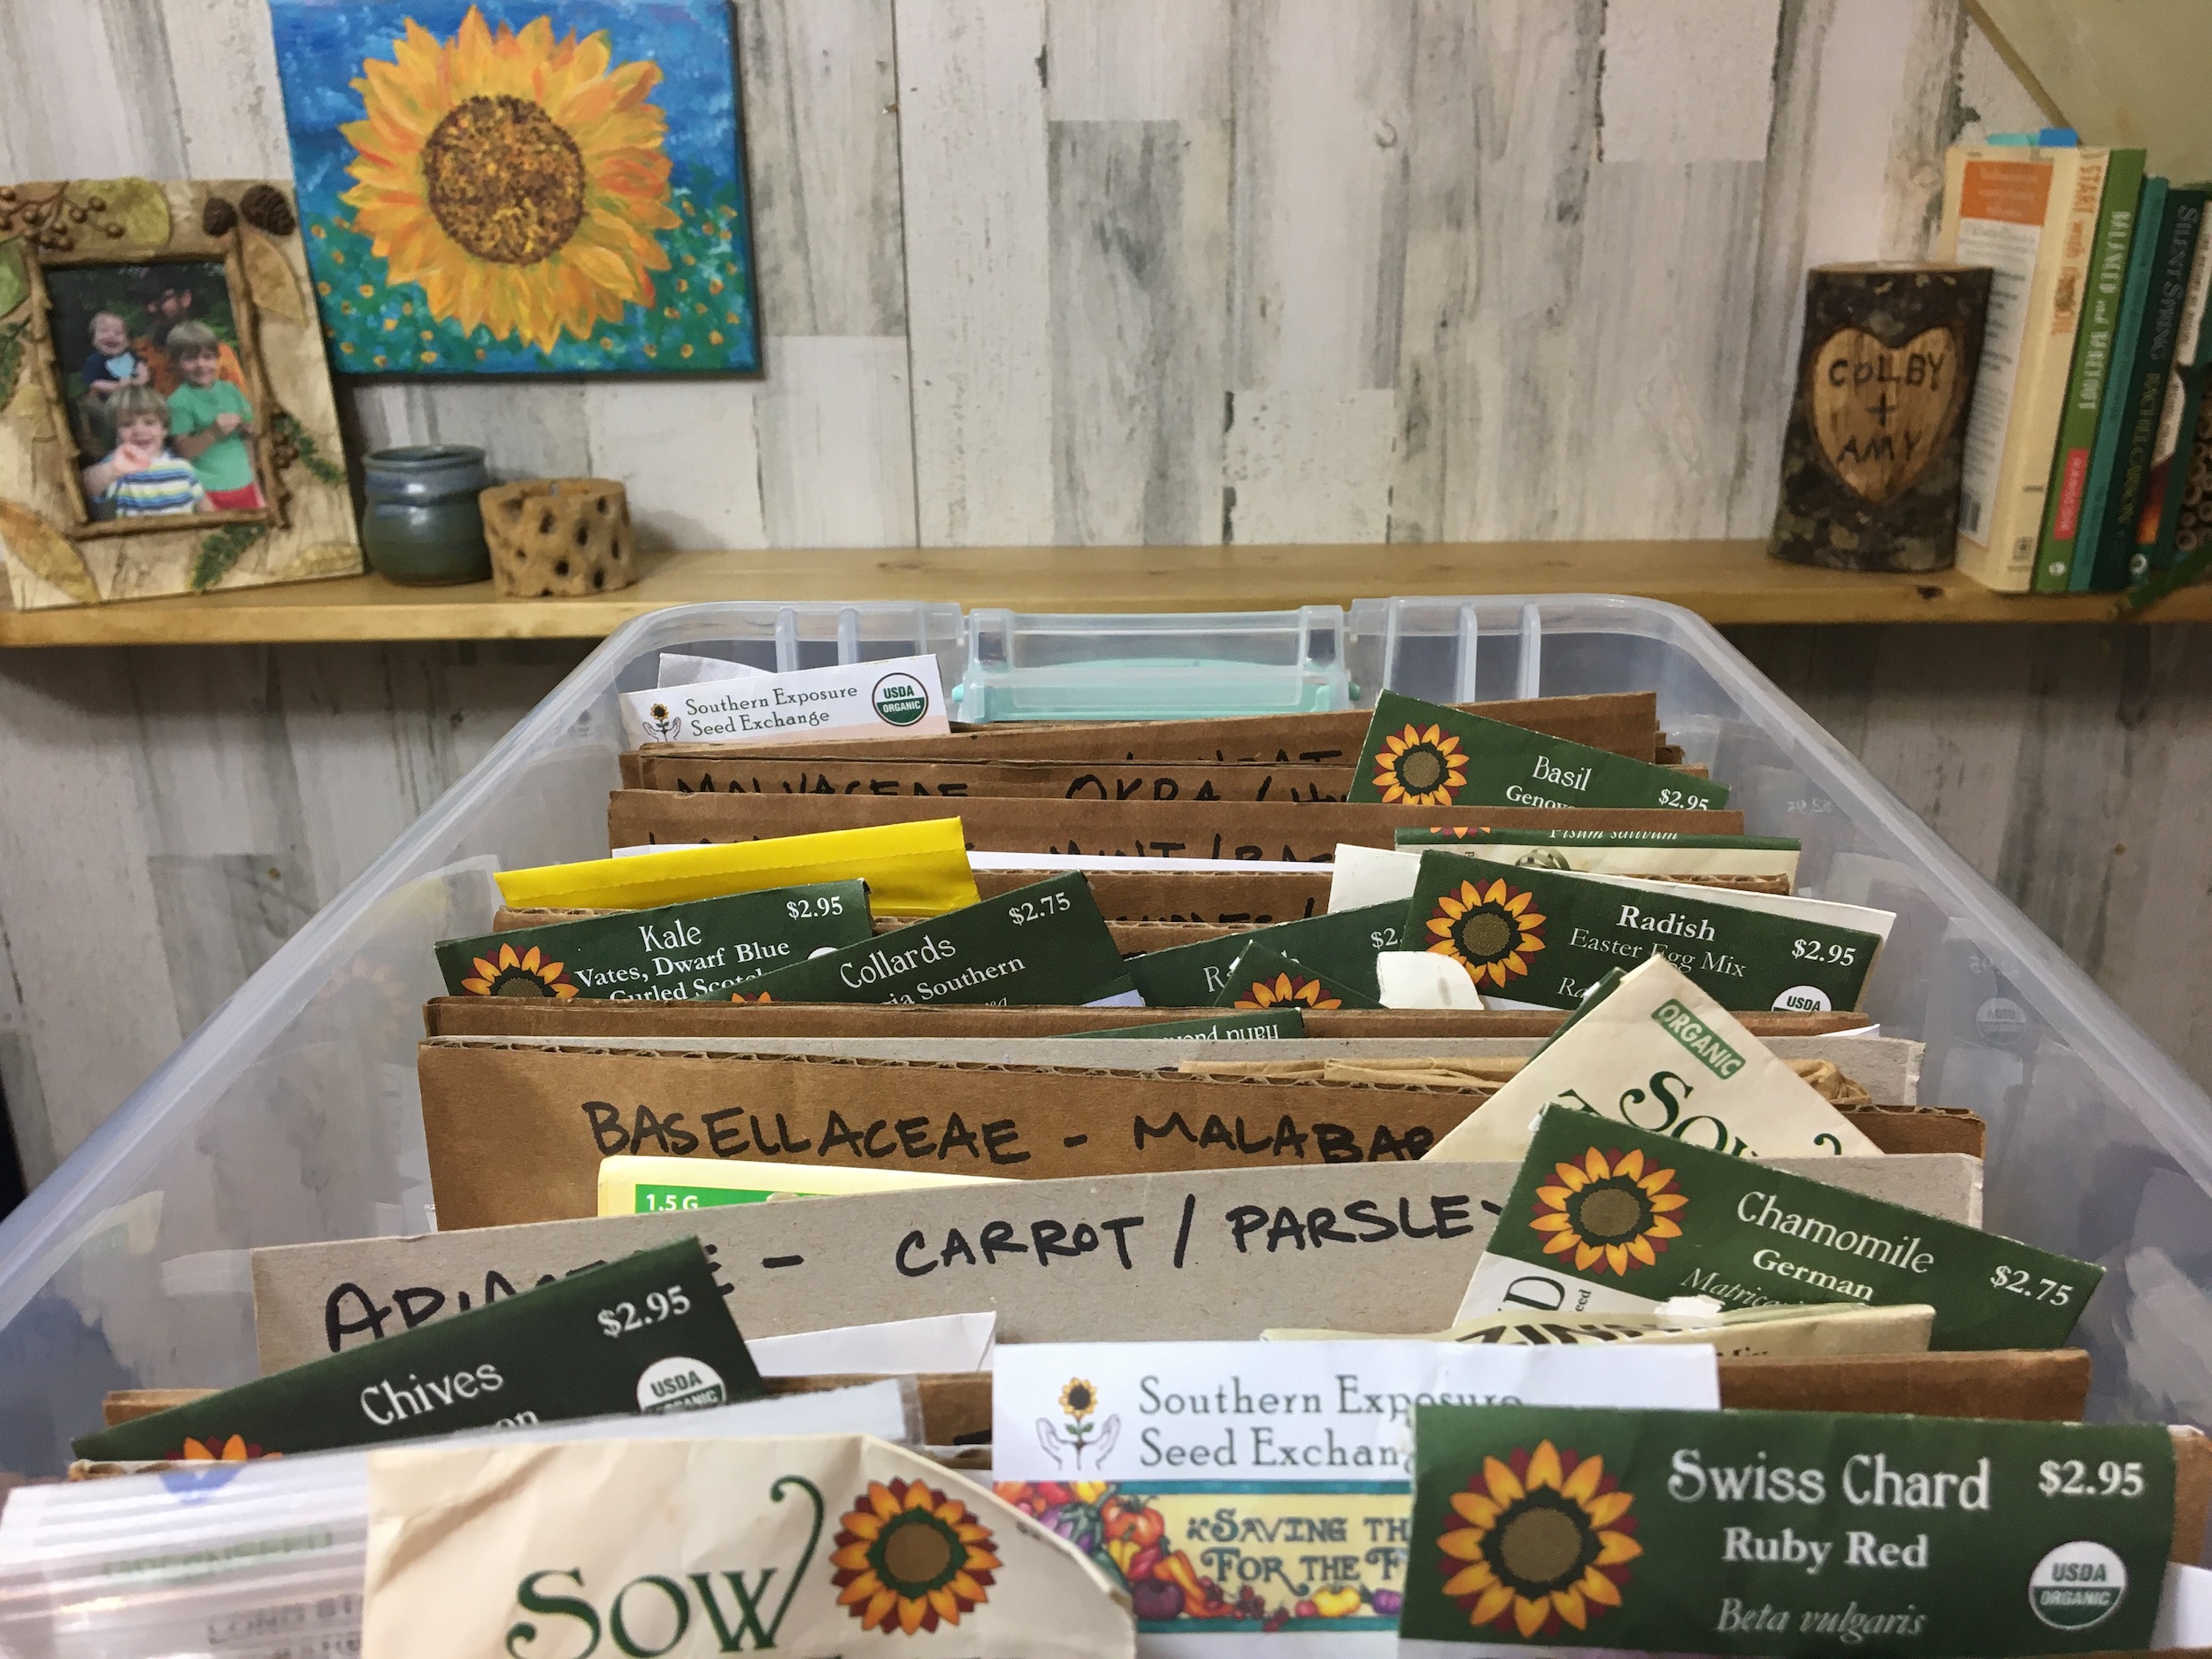 How to Store and Organize Seeds - Gardens That Matter